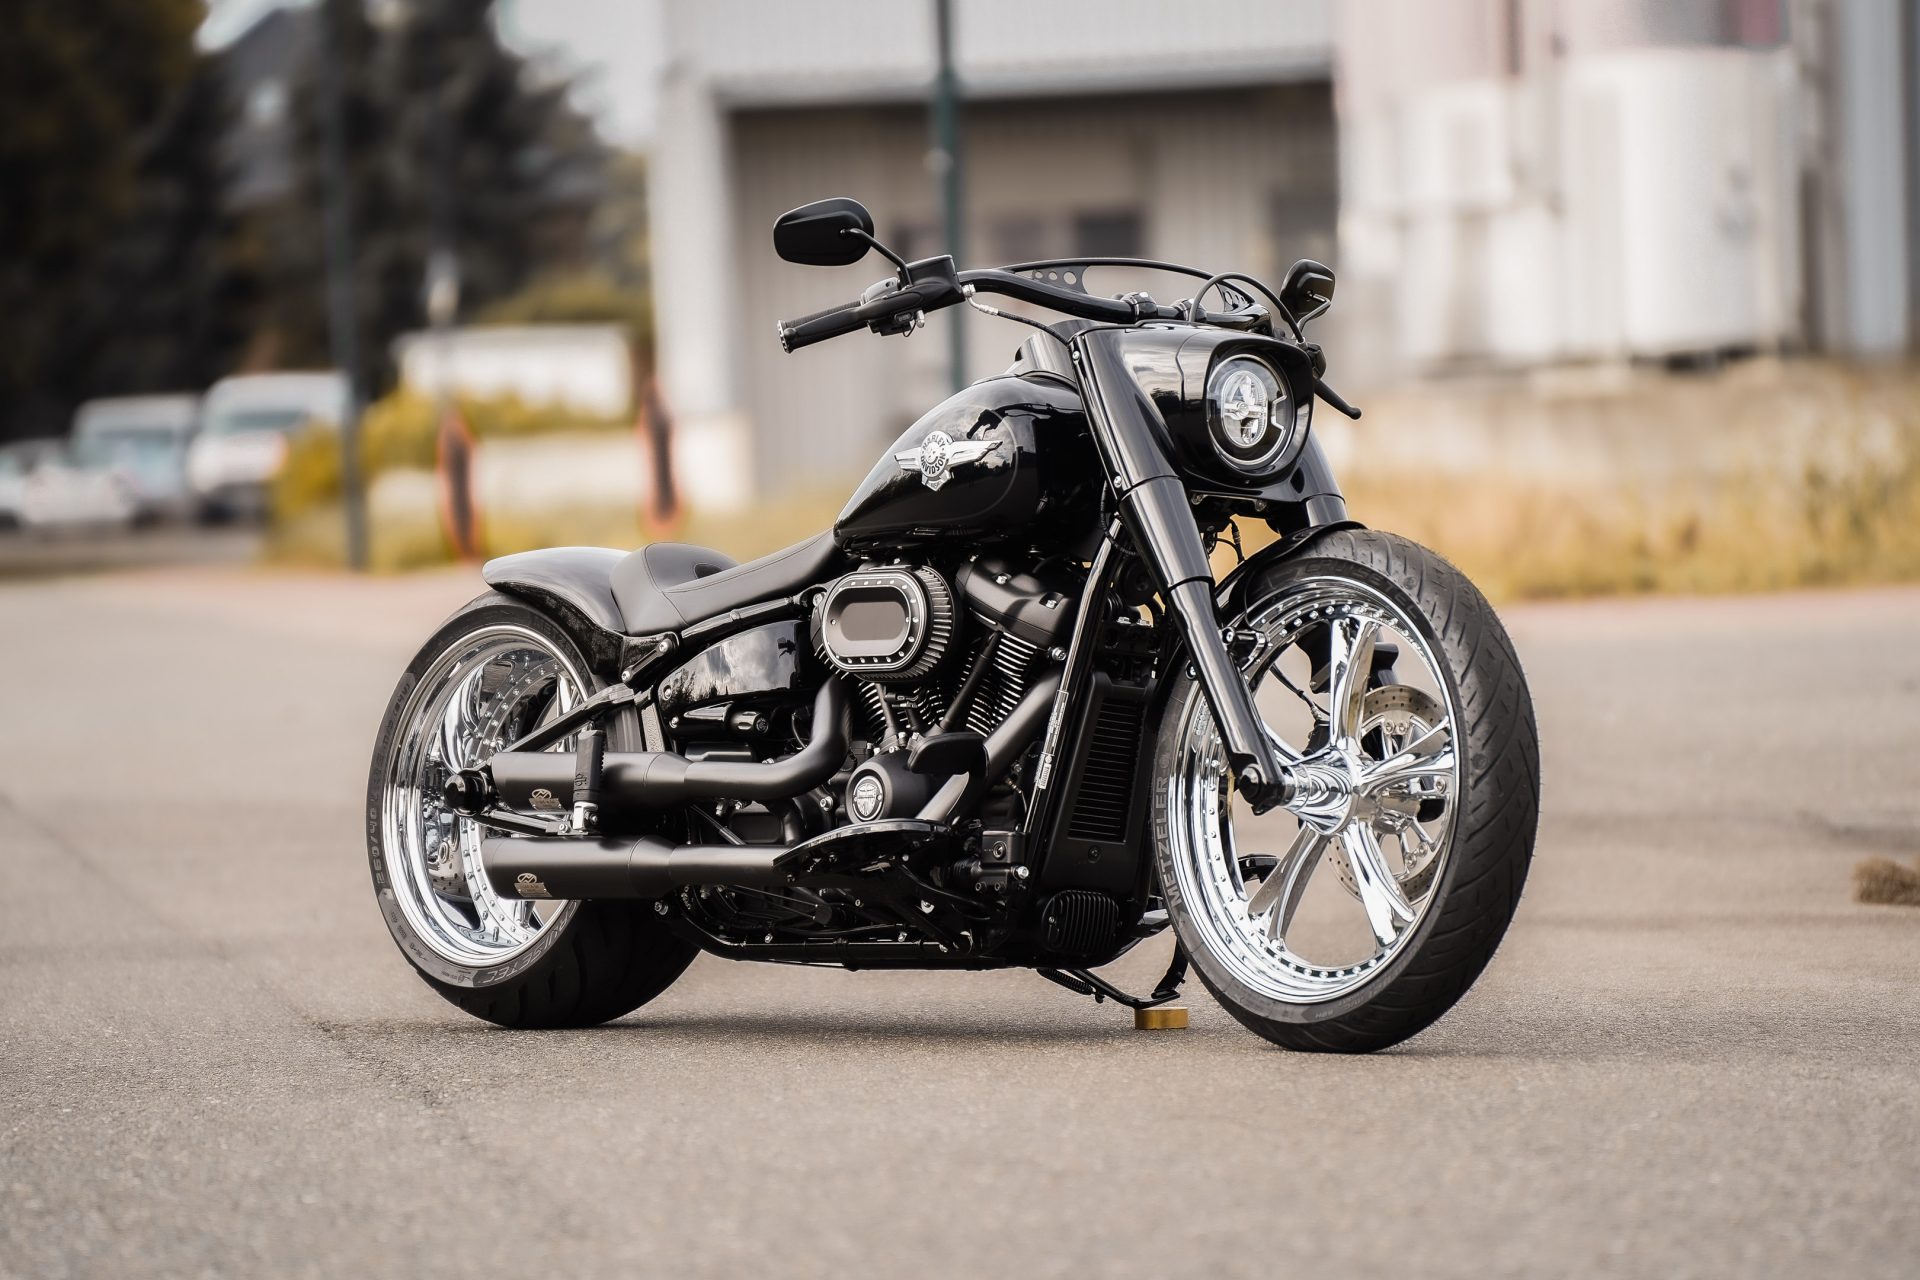 The Boss M8 FLFB Fat Boy – Motorcycle Parts, Bobber Chopper Motorcycle Parts by